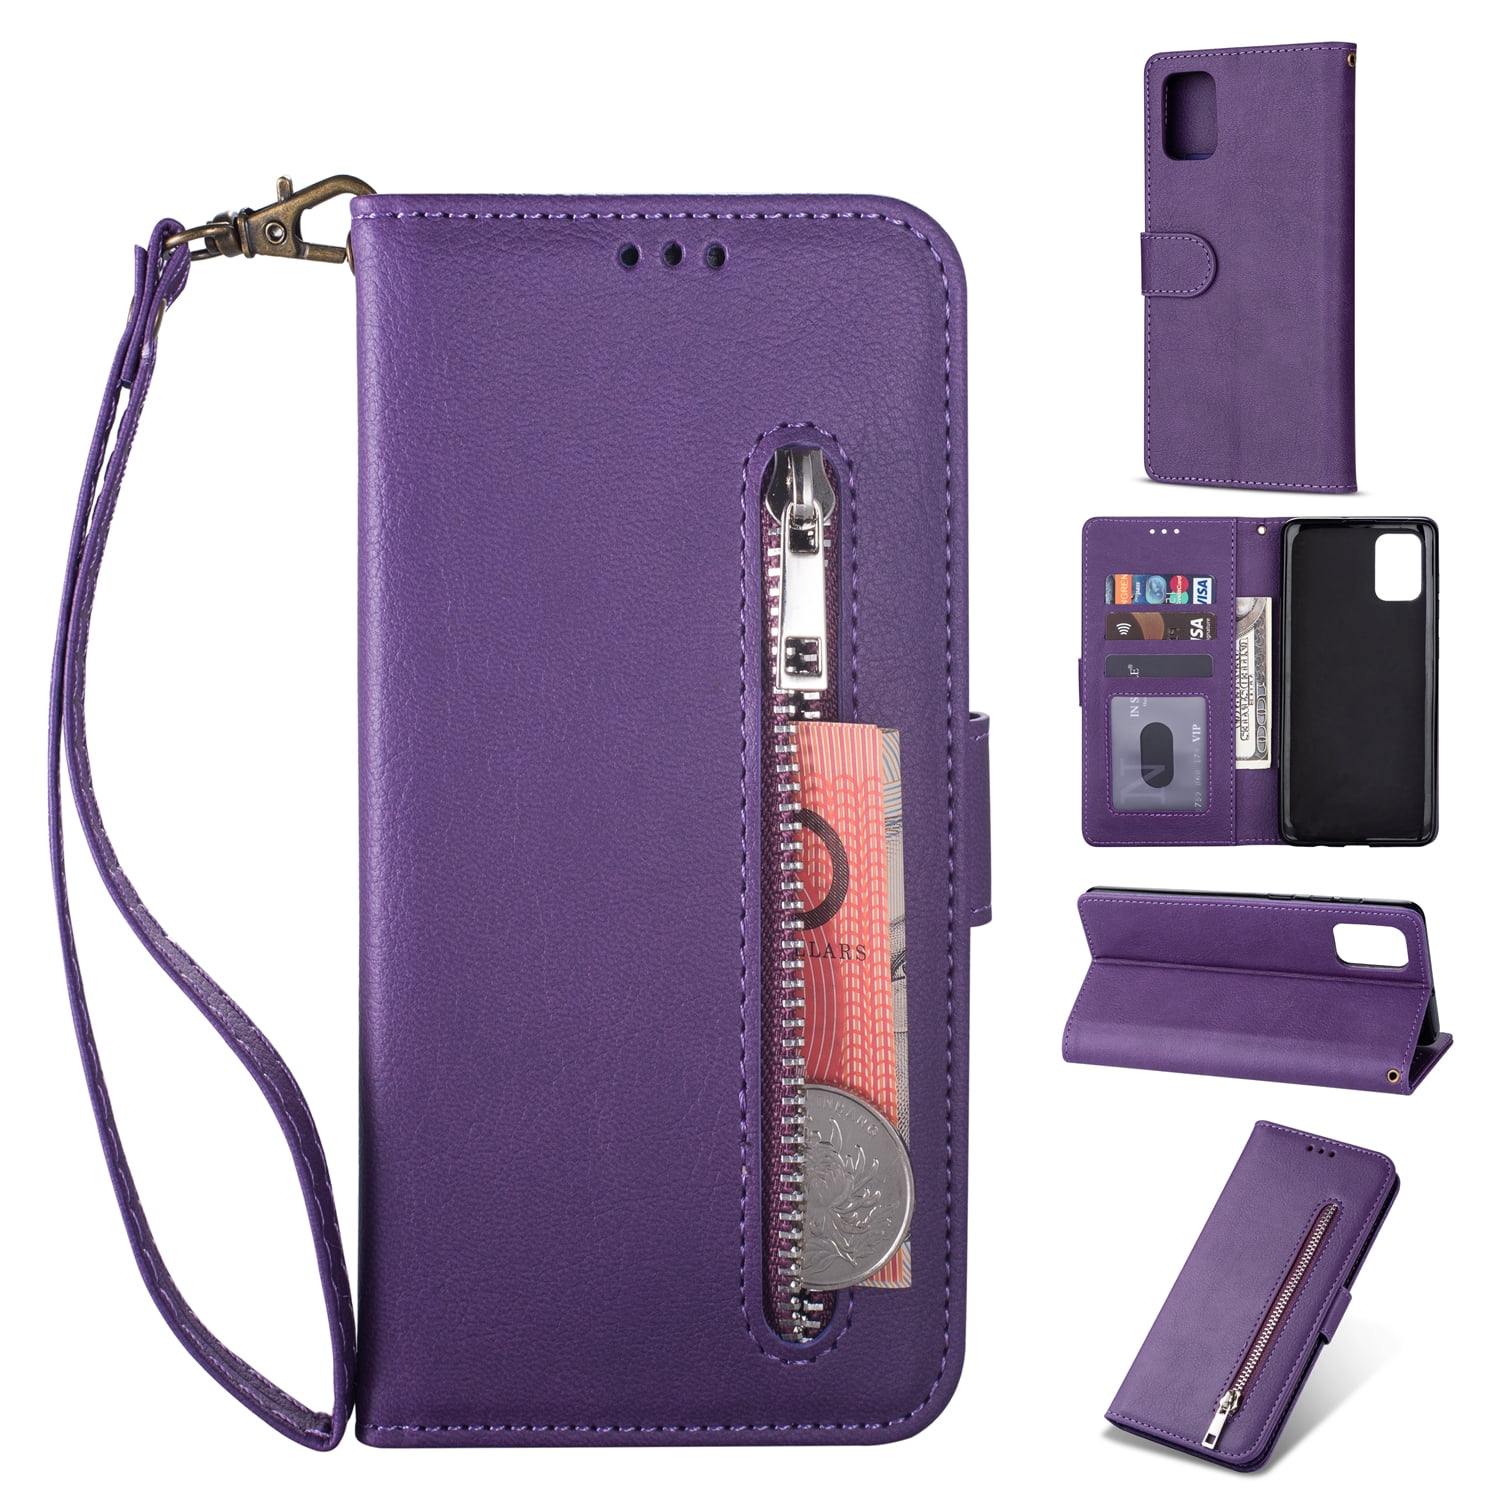 Allytech Galaxy A71 5G Case, PU Leather Folio Flip Cover with Credit ...